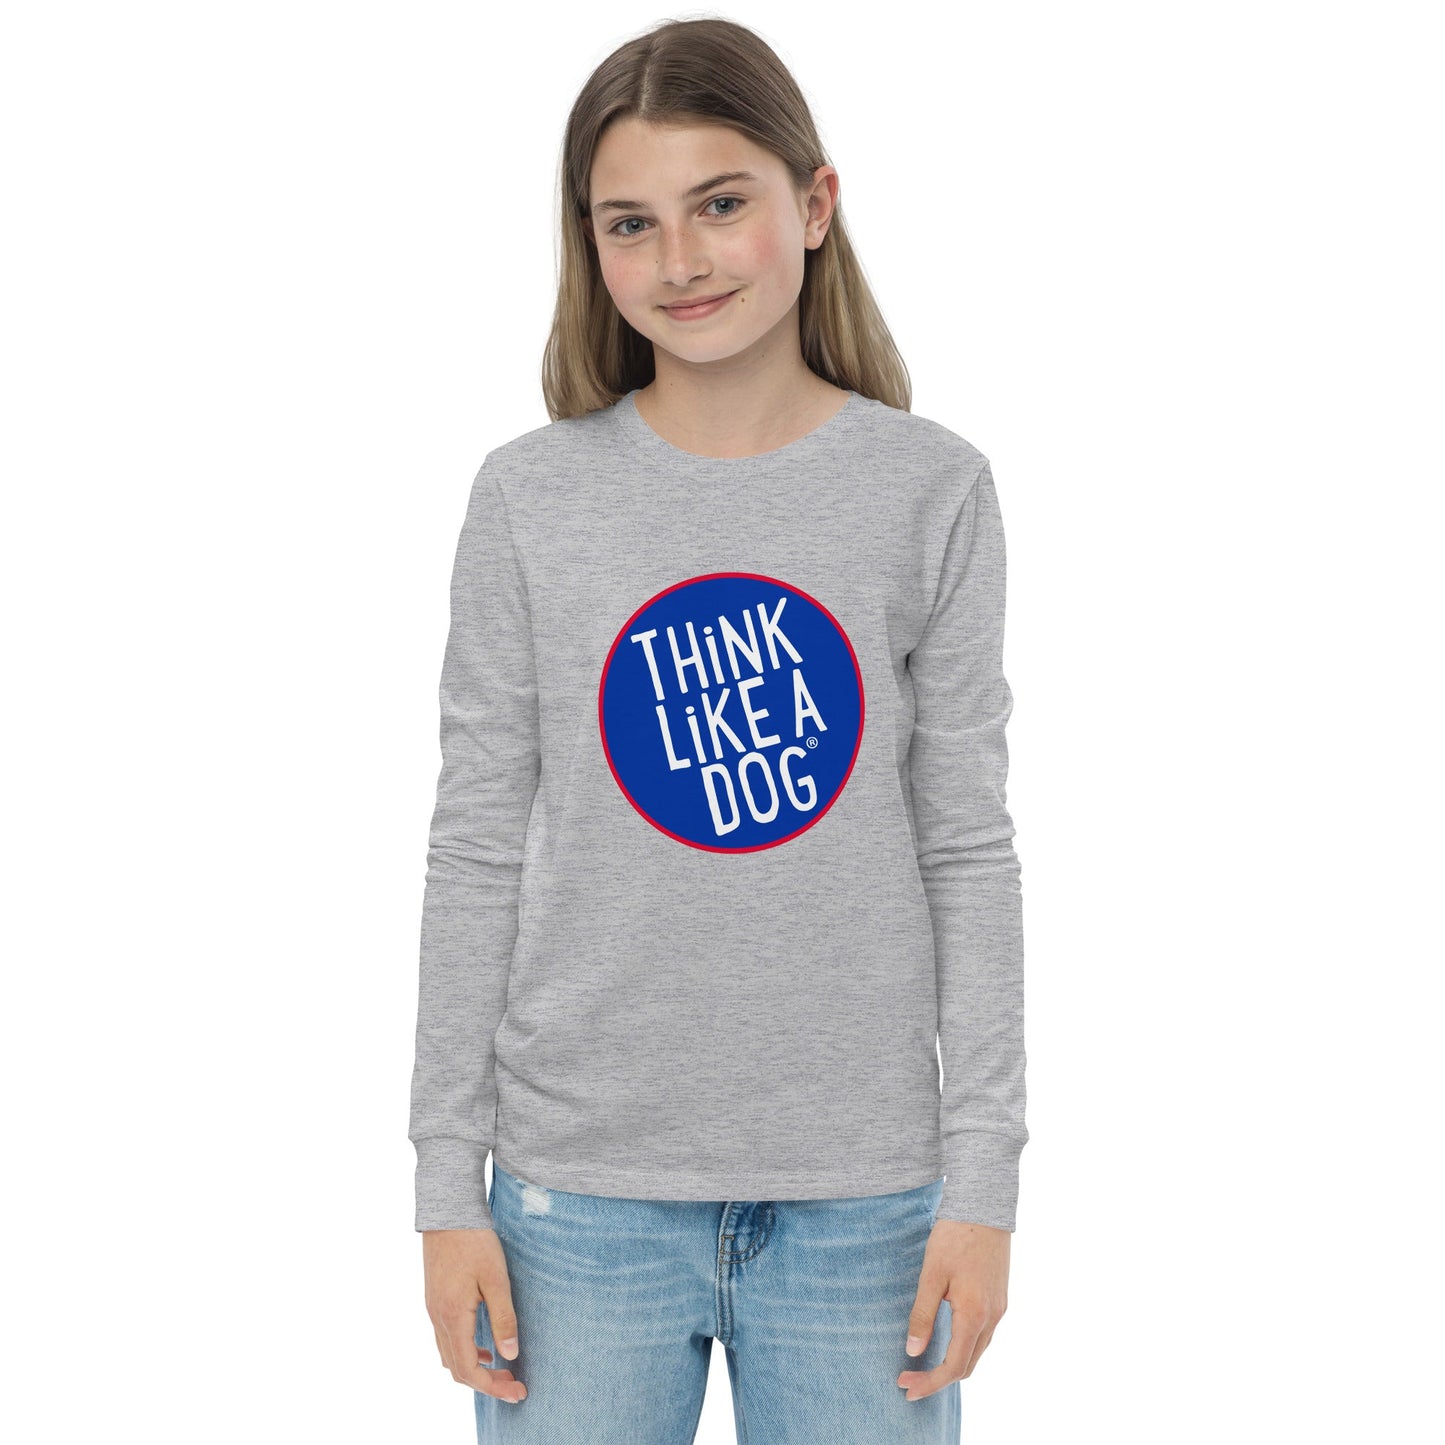 Young woman wearing a gray Kids Long Sleeve Tee made from Airlume combed cotton with the text "think like a dog" in a blue and red circle by THiNK LiKE A DOG®.